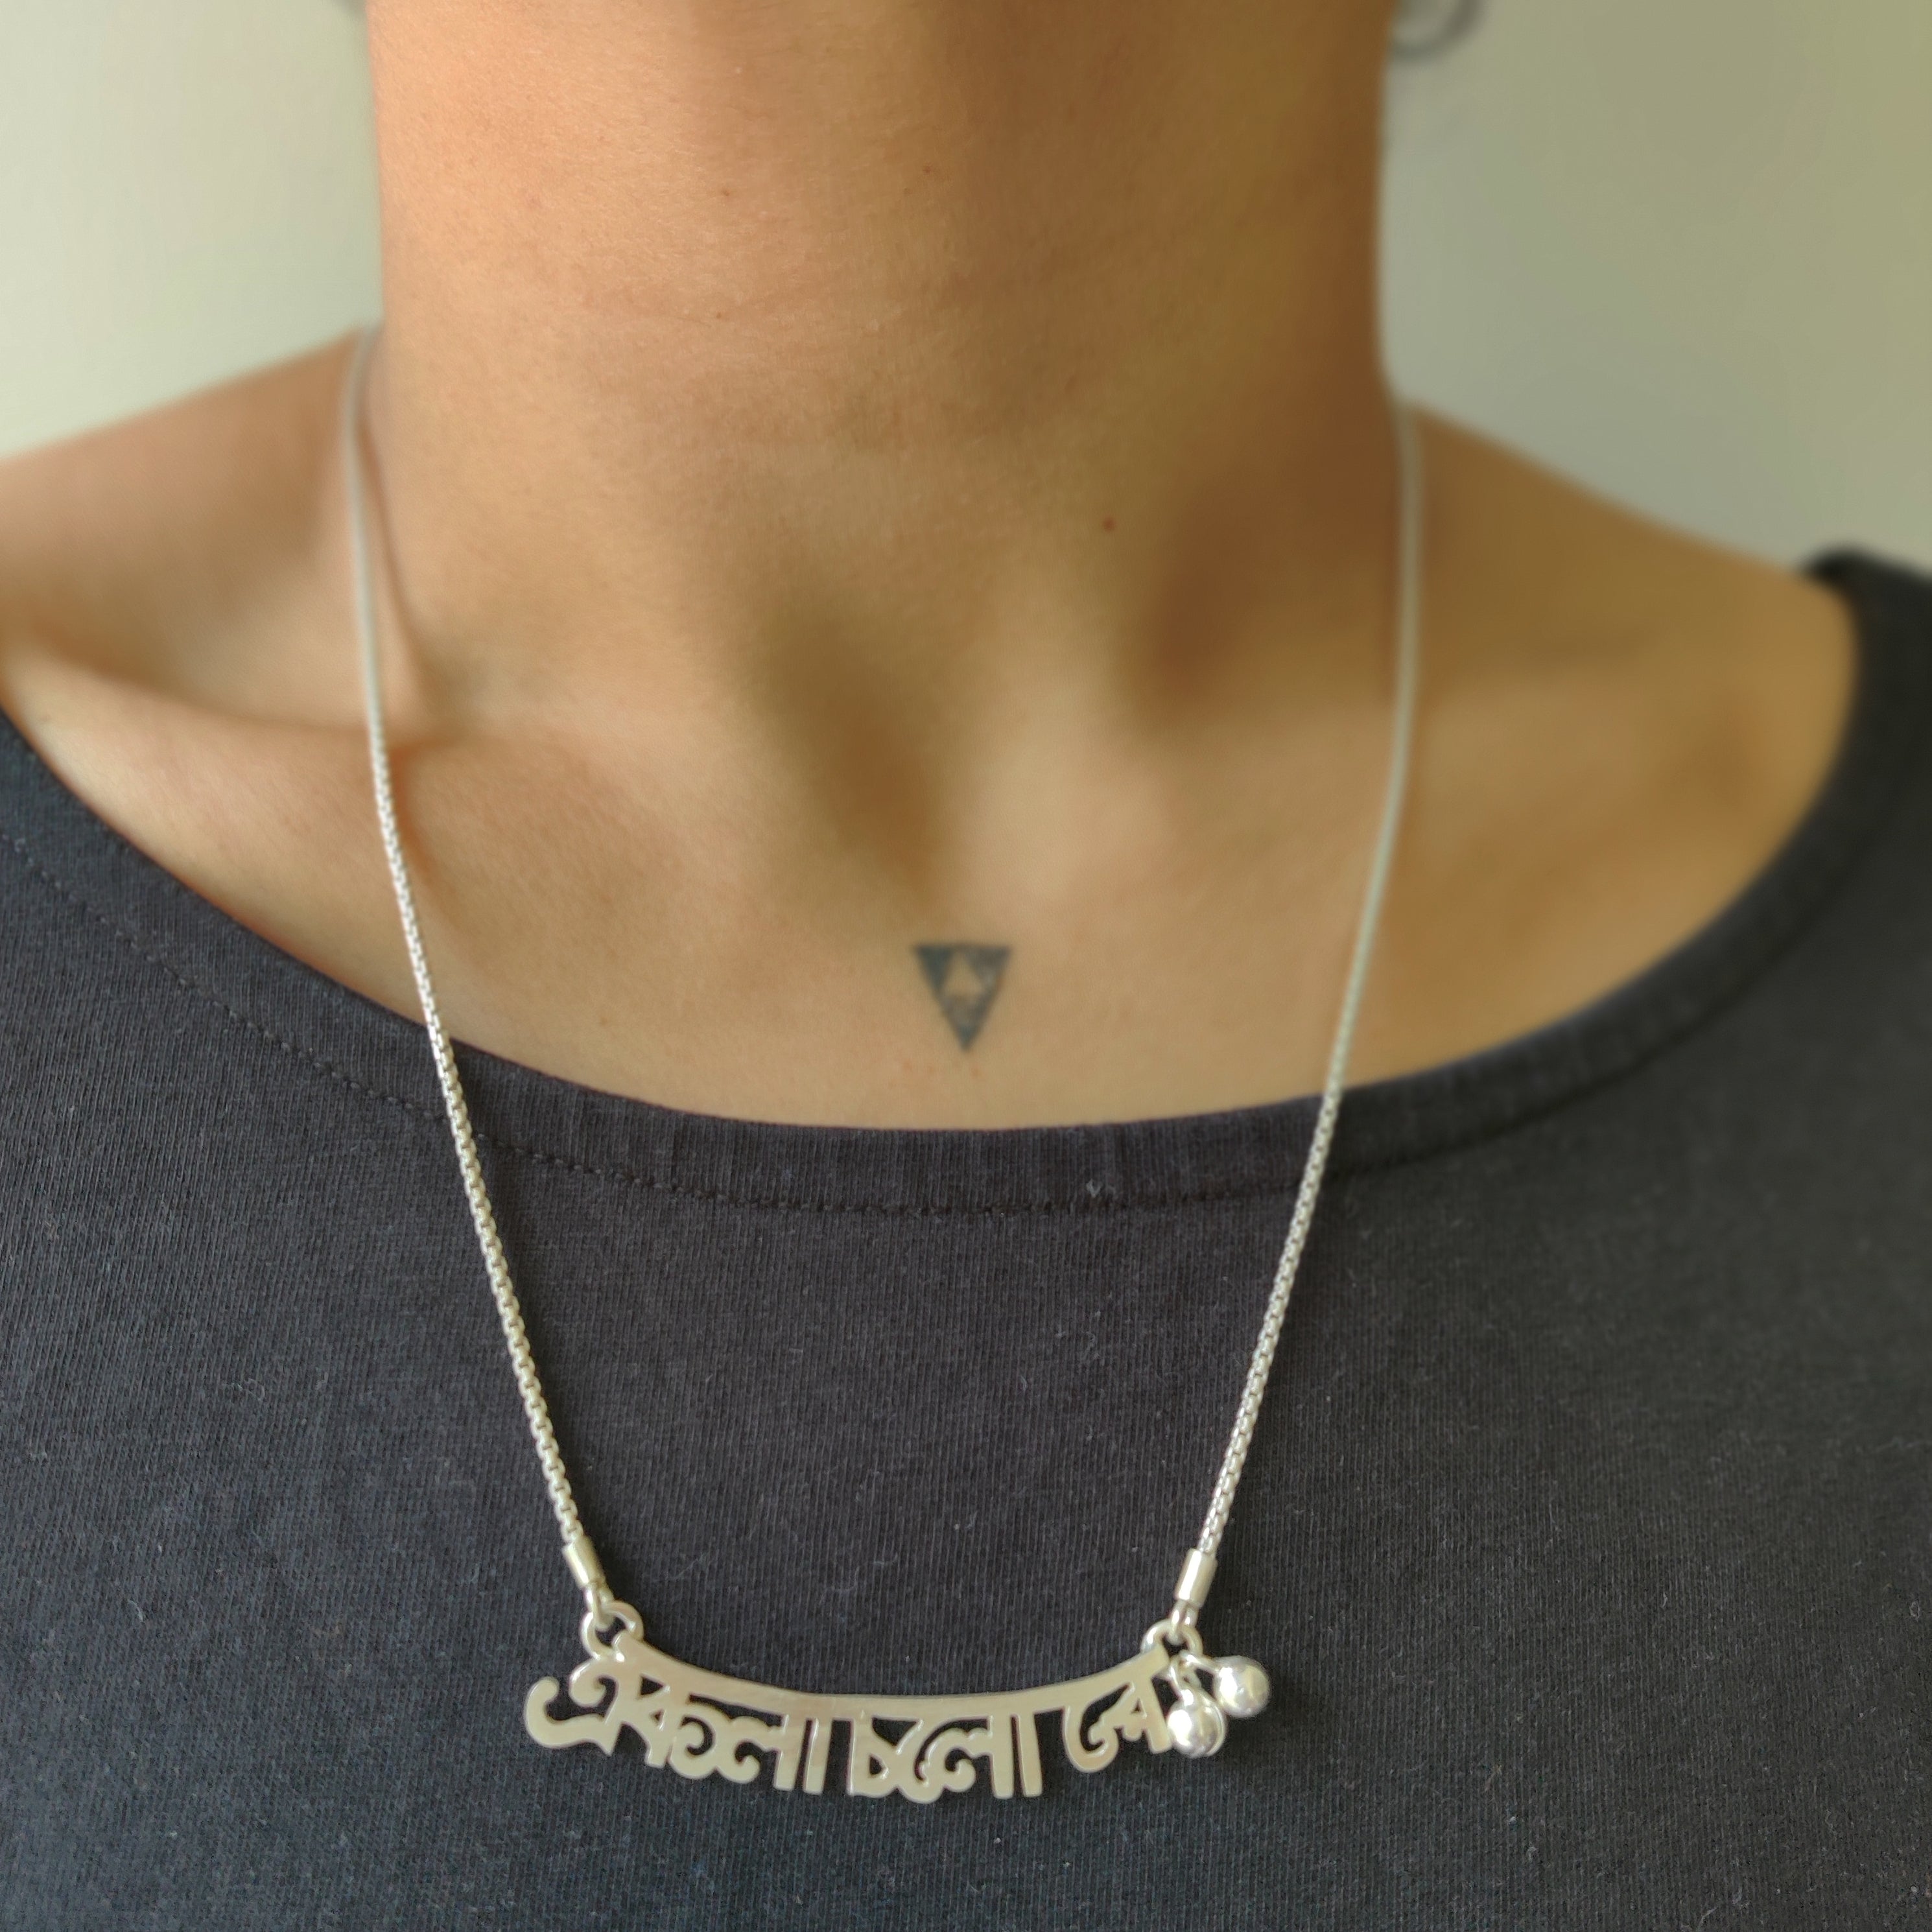 Buy Silver Necklace with words Online - Ekla Cholo Re Necklace - Quirksmith